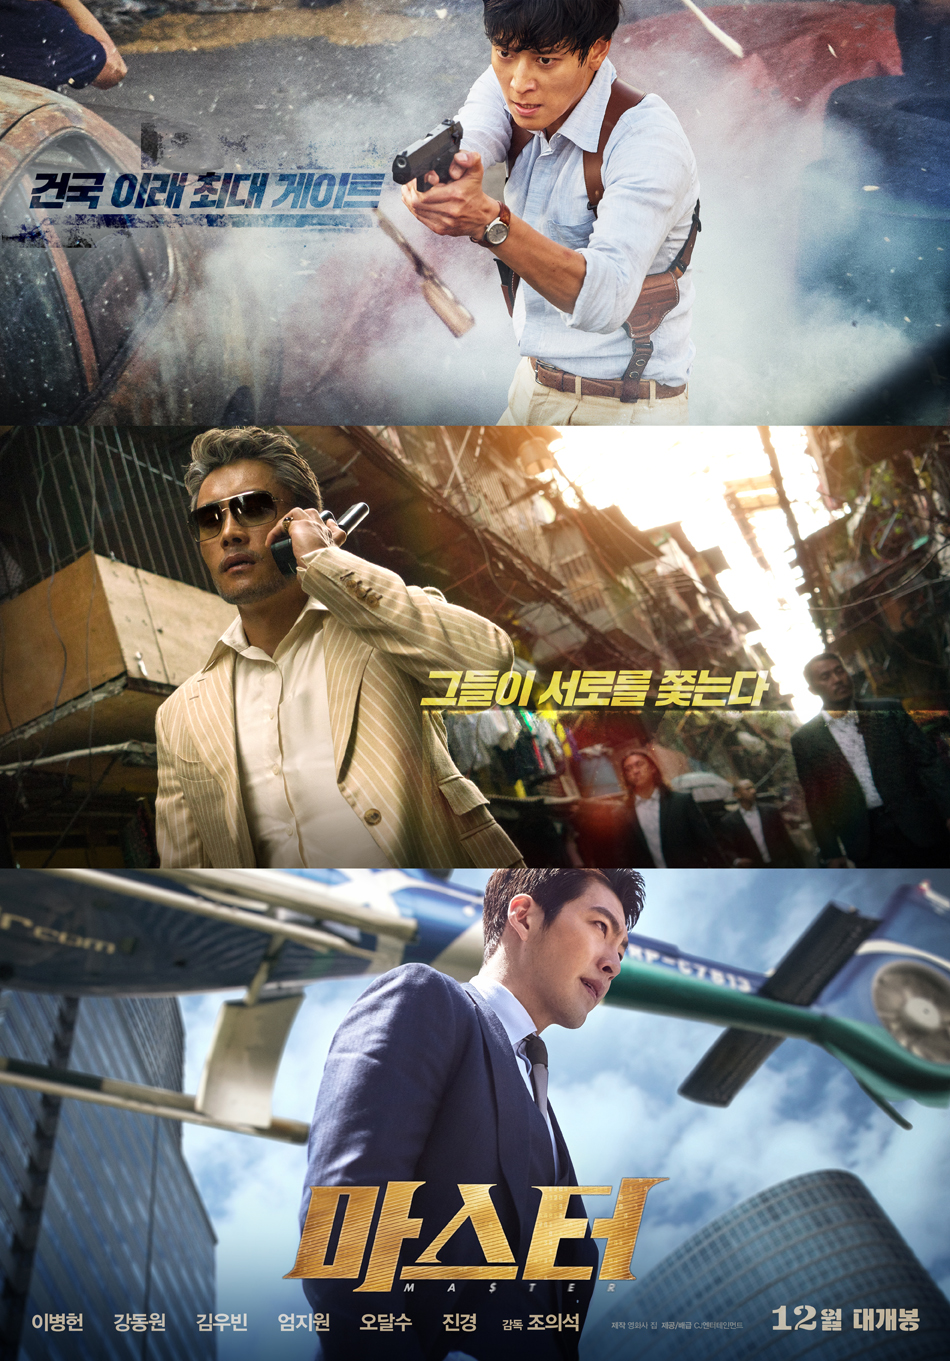 Lee Byung-heon, Kang Dong-won face off for Kim Woo-bin’s loyalty in Master